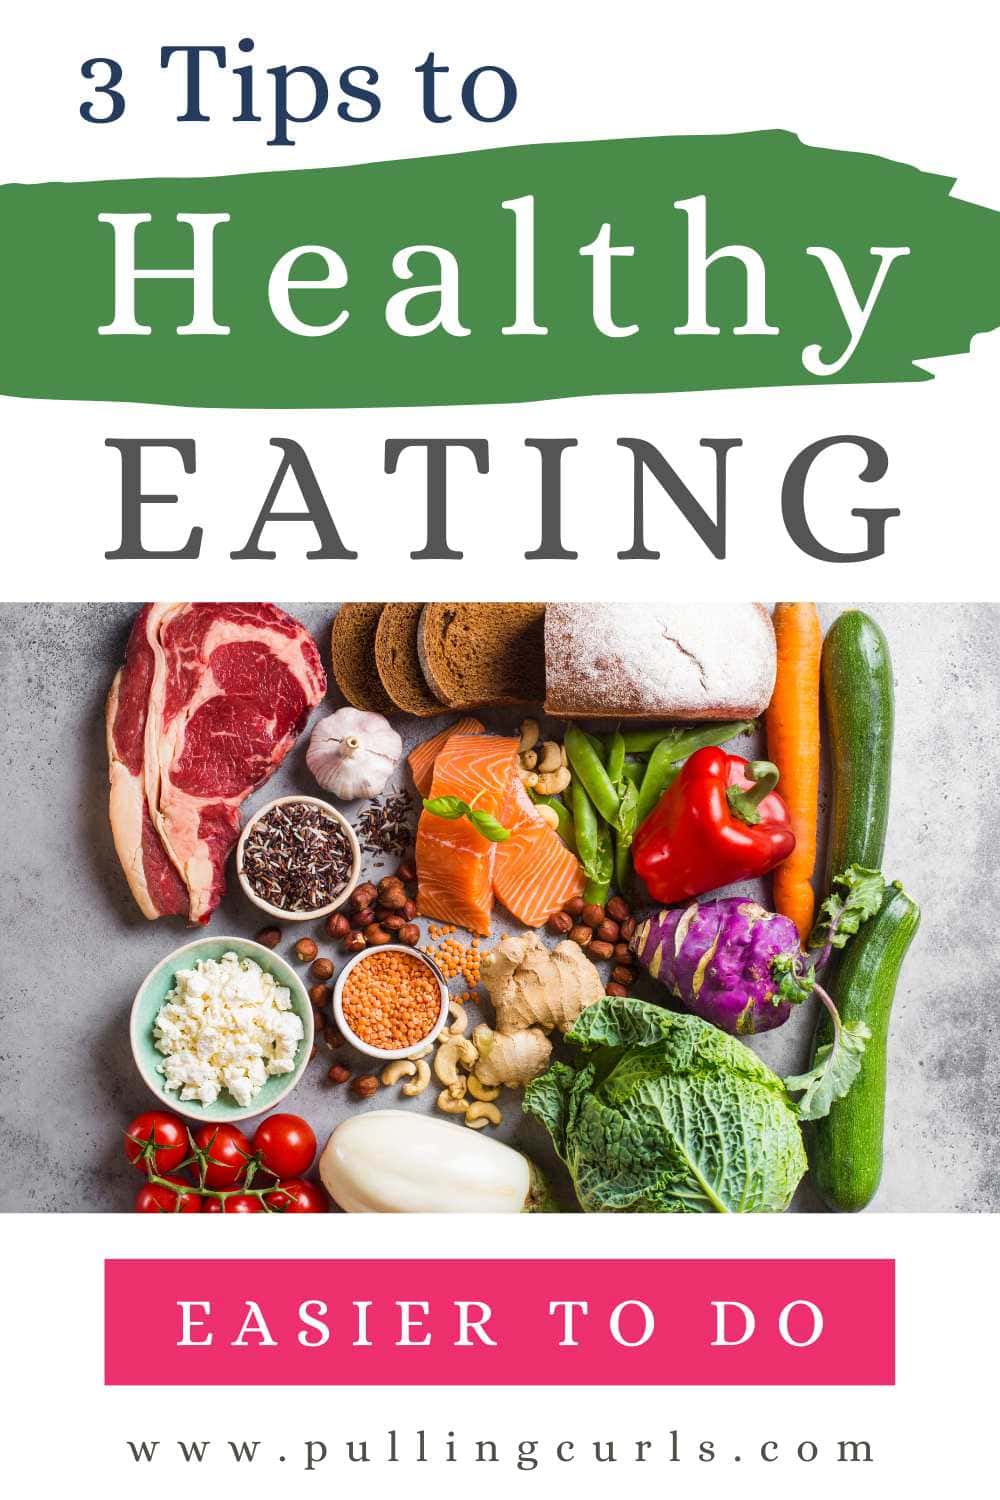 3 habits for healthy eaters via @pullingcurls